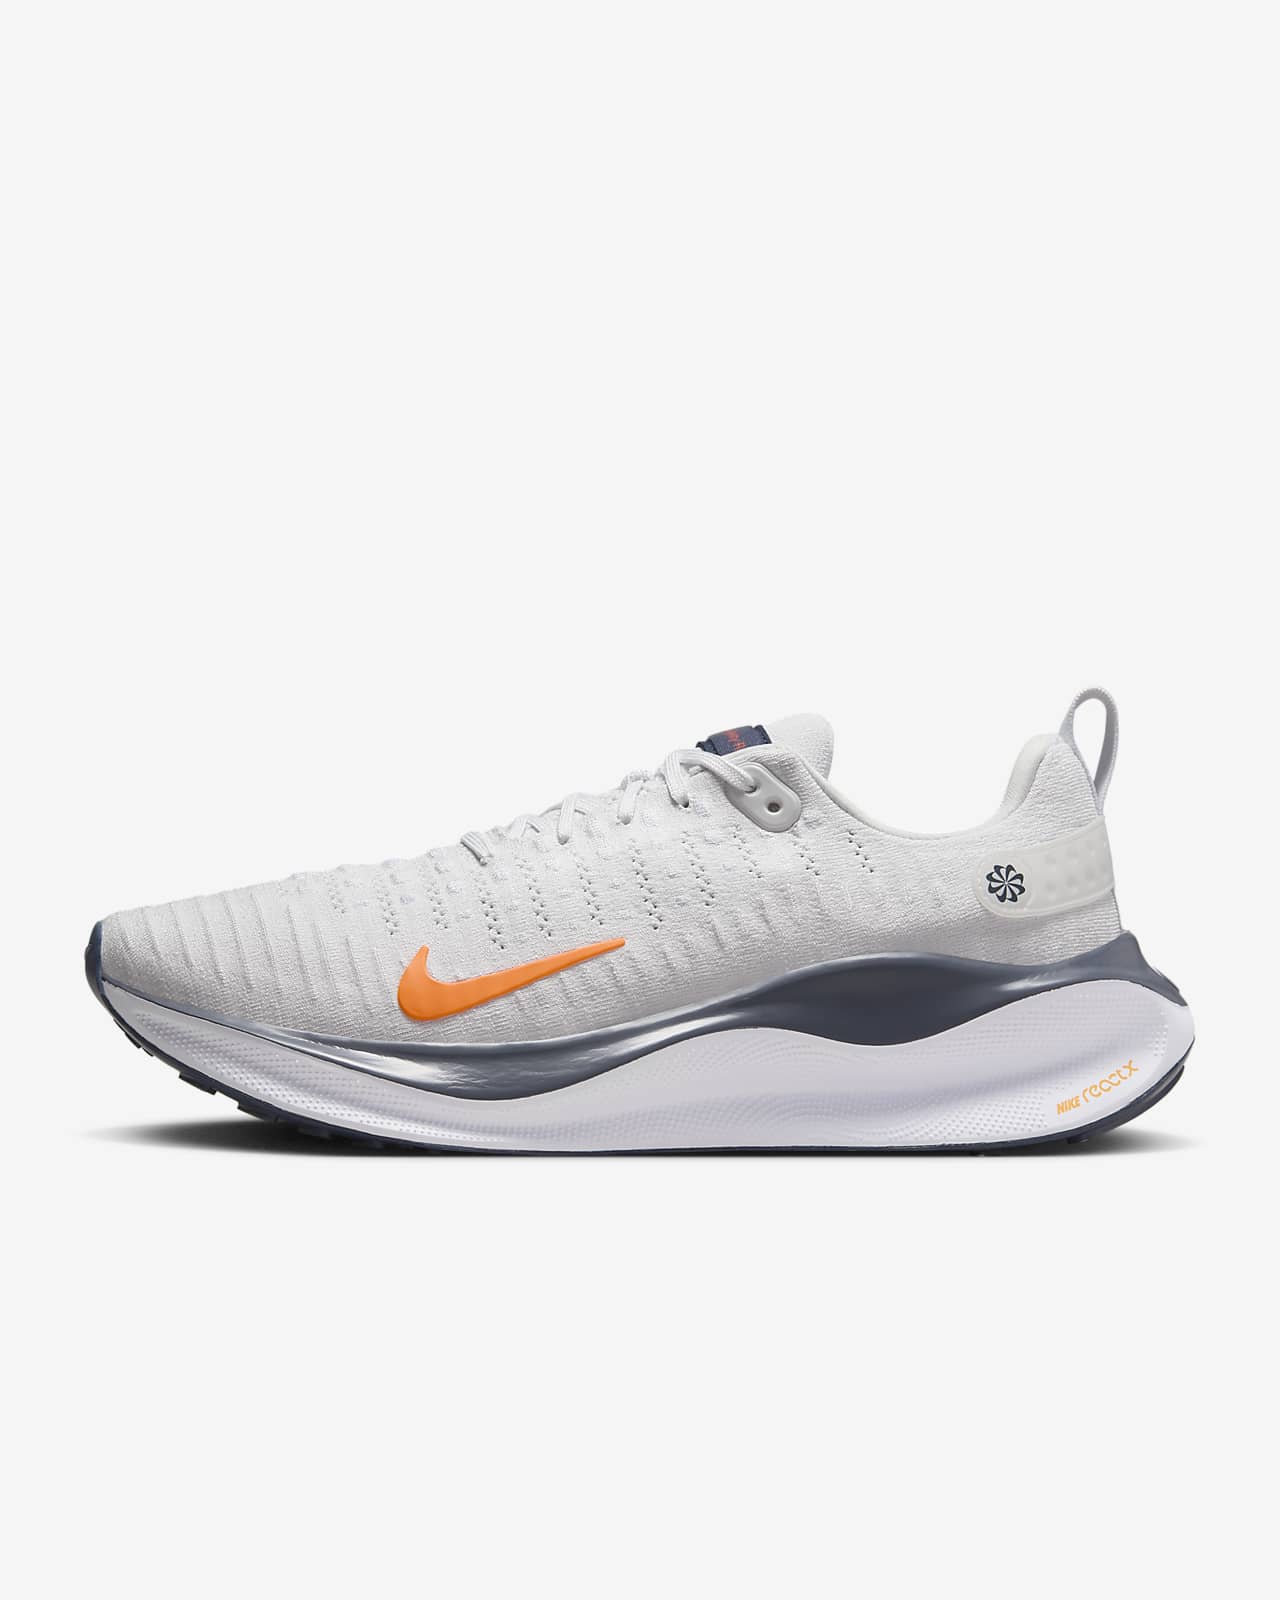 Chaussure de running sur route Nike InfinityRN 4 pour homme